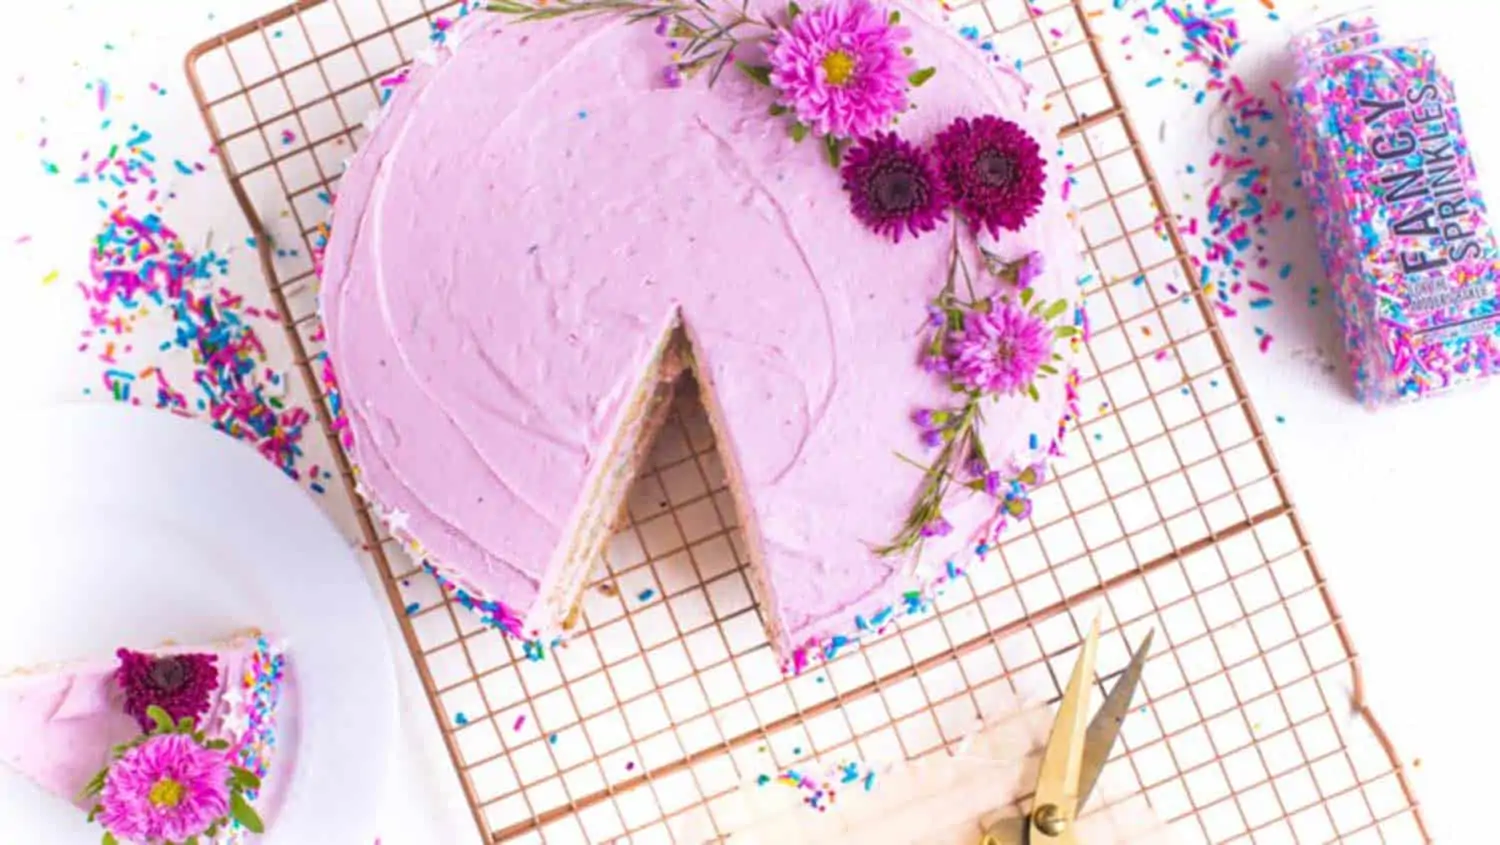 vegan birthday cake with pink frosting, sprinkles, and flowers on a gridded surface